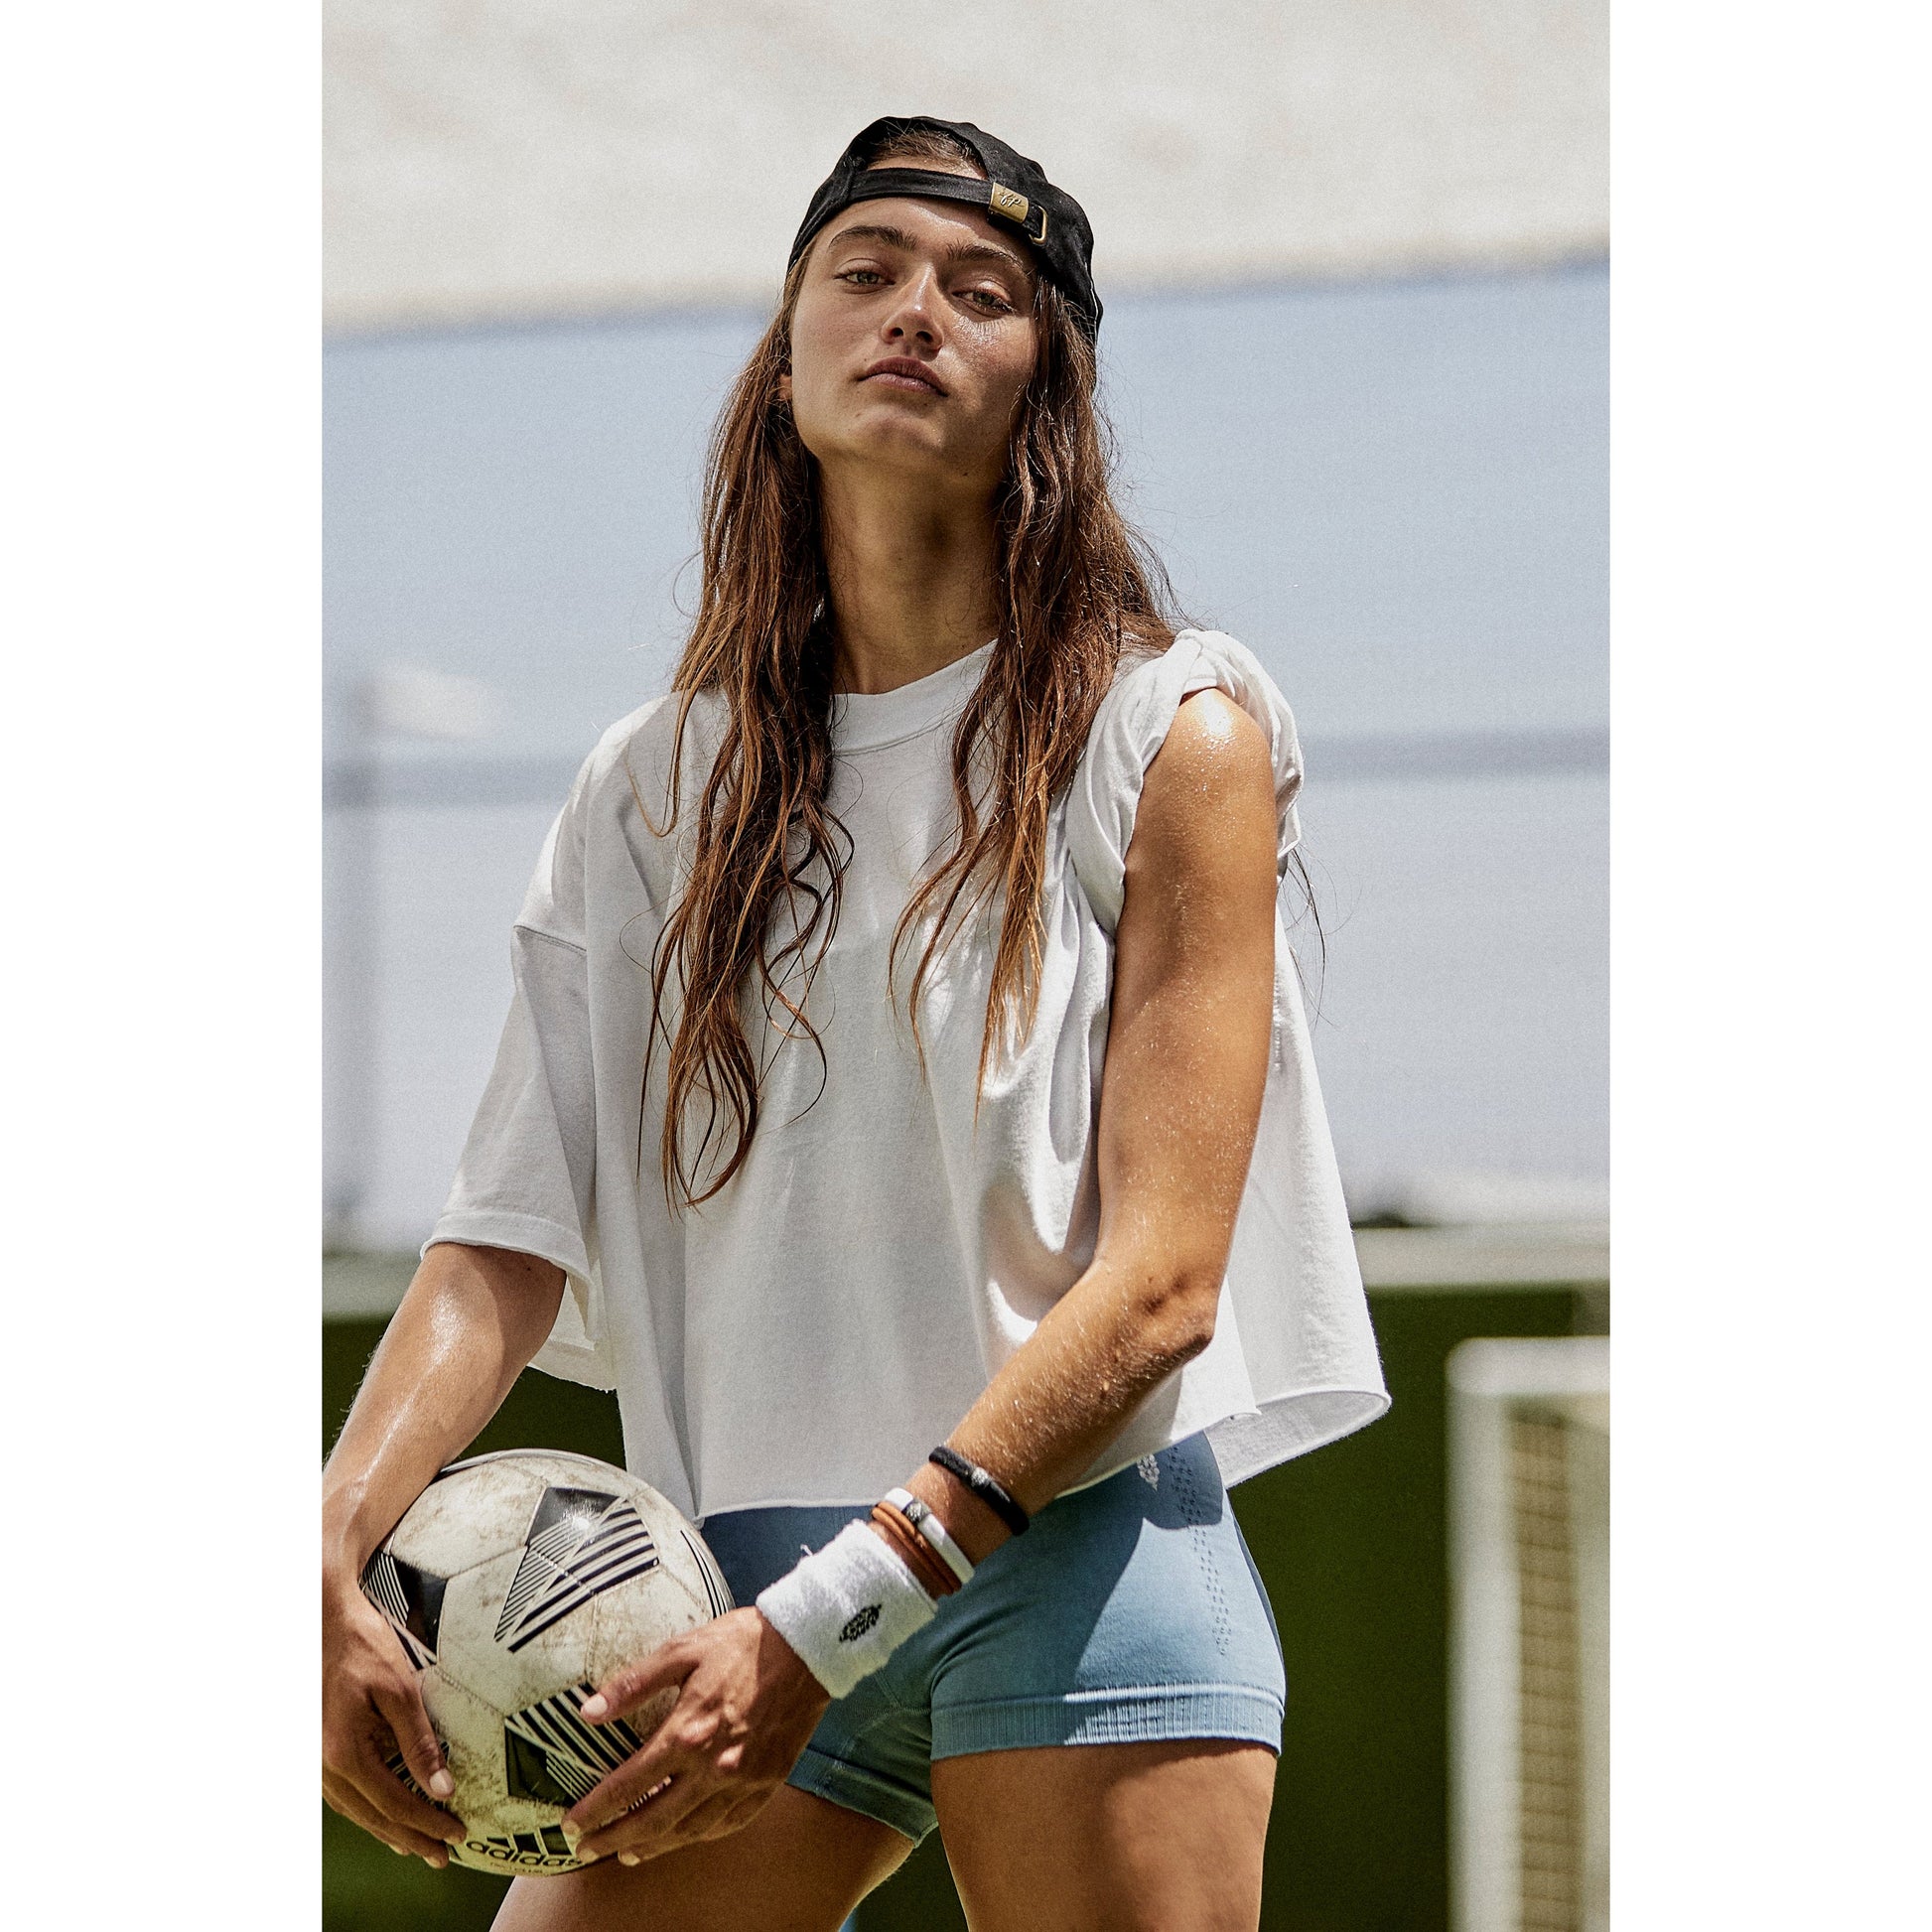 A woman in an oversized boxy fit Free People Movement Inspire Tee, White and denim shorts holding a soccer ball, wearing a black cap, standing on a field under a sunny sky.